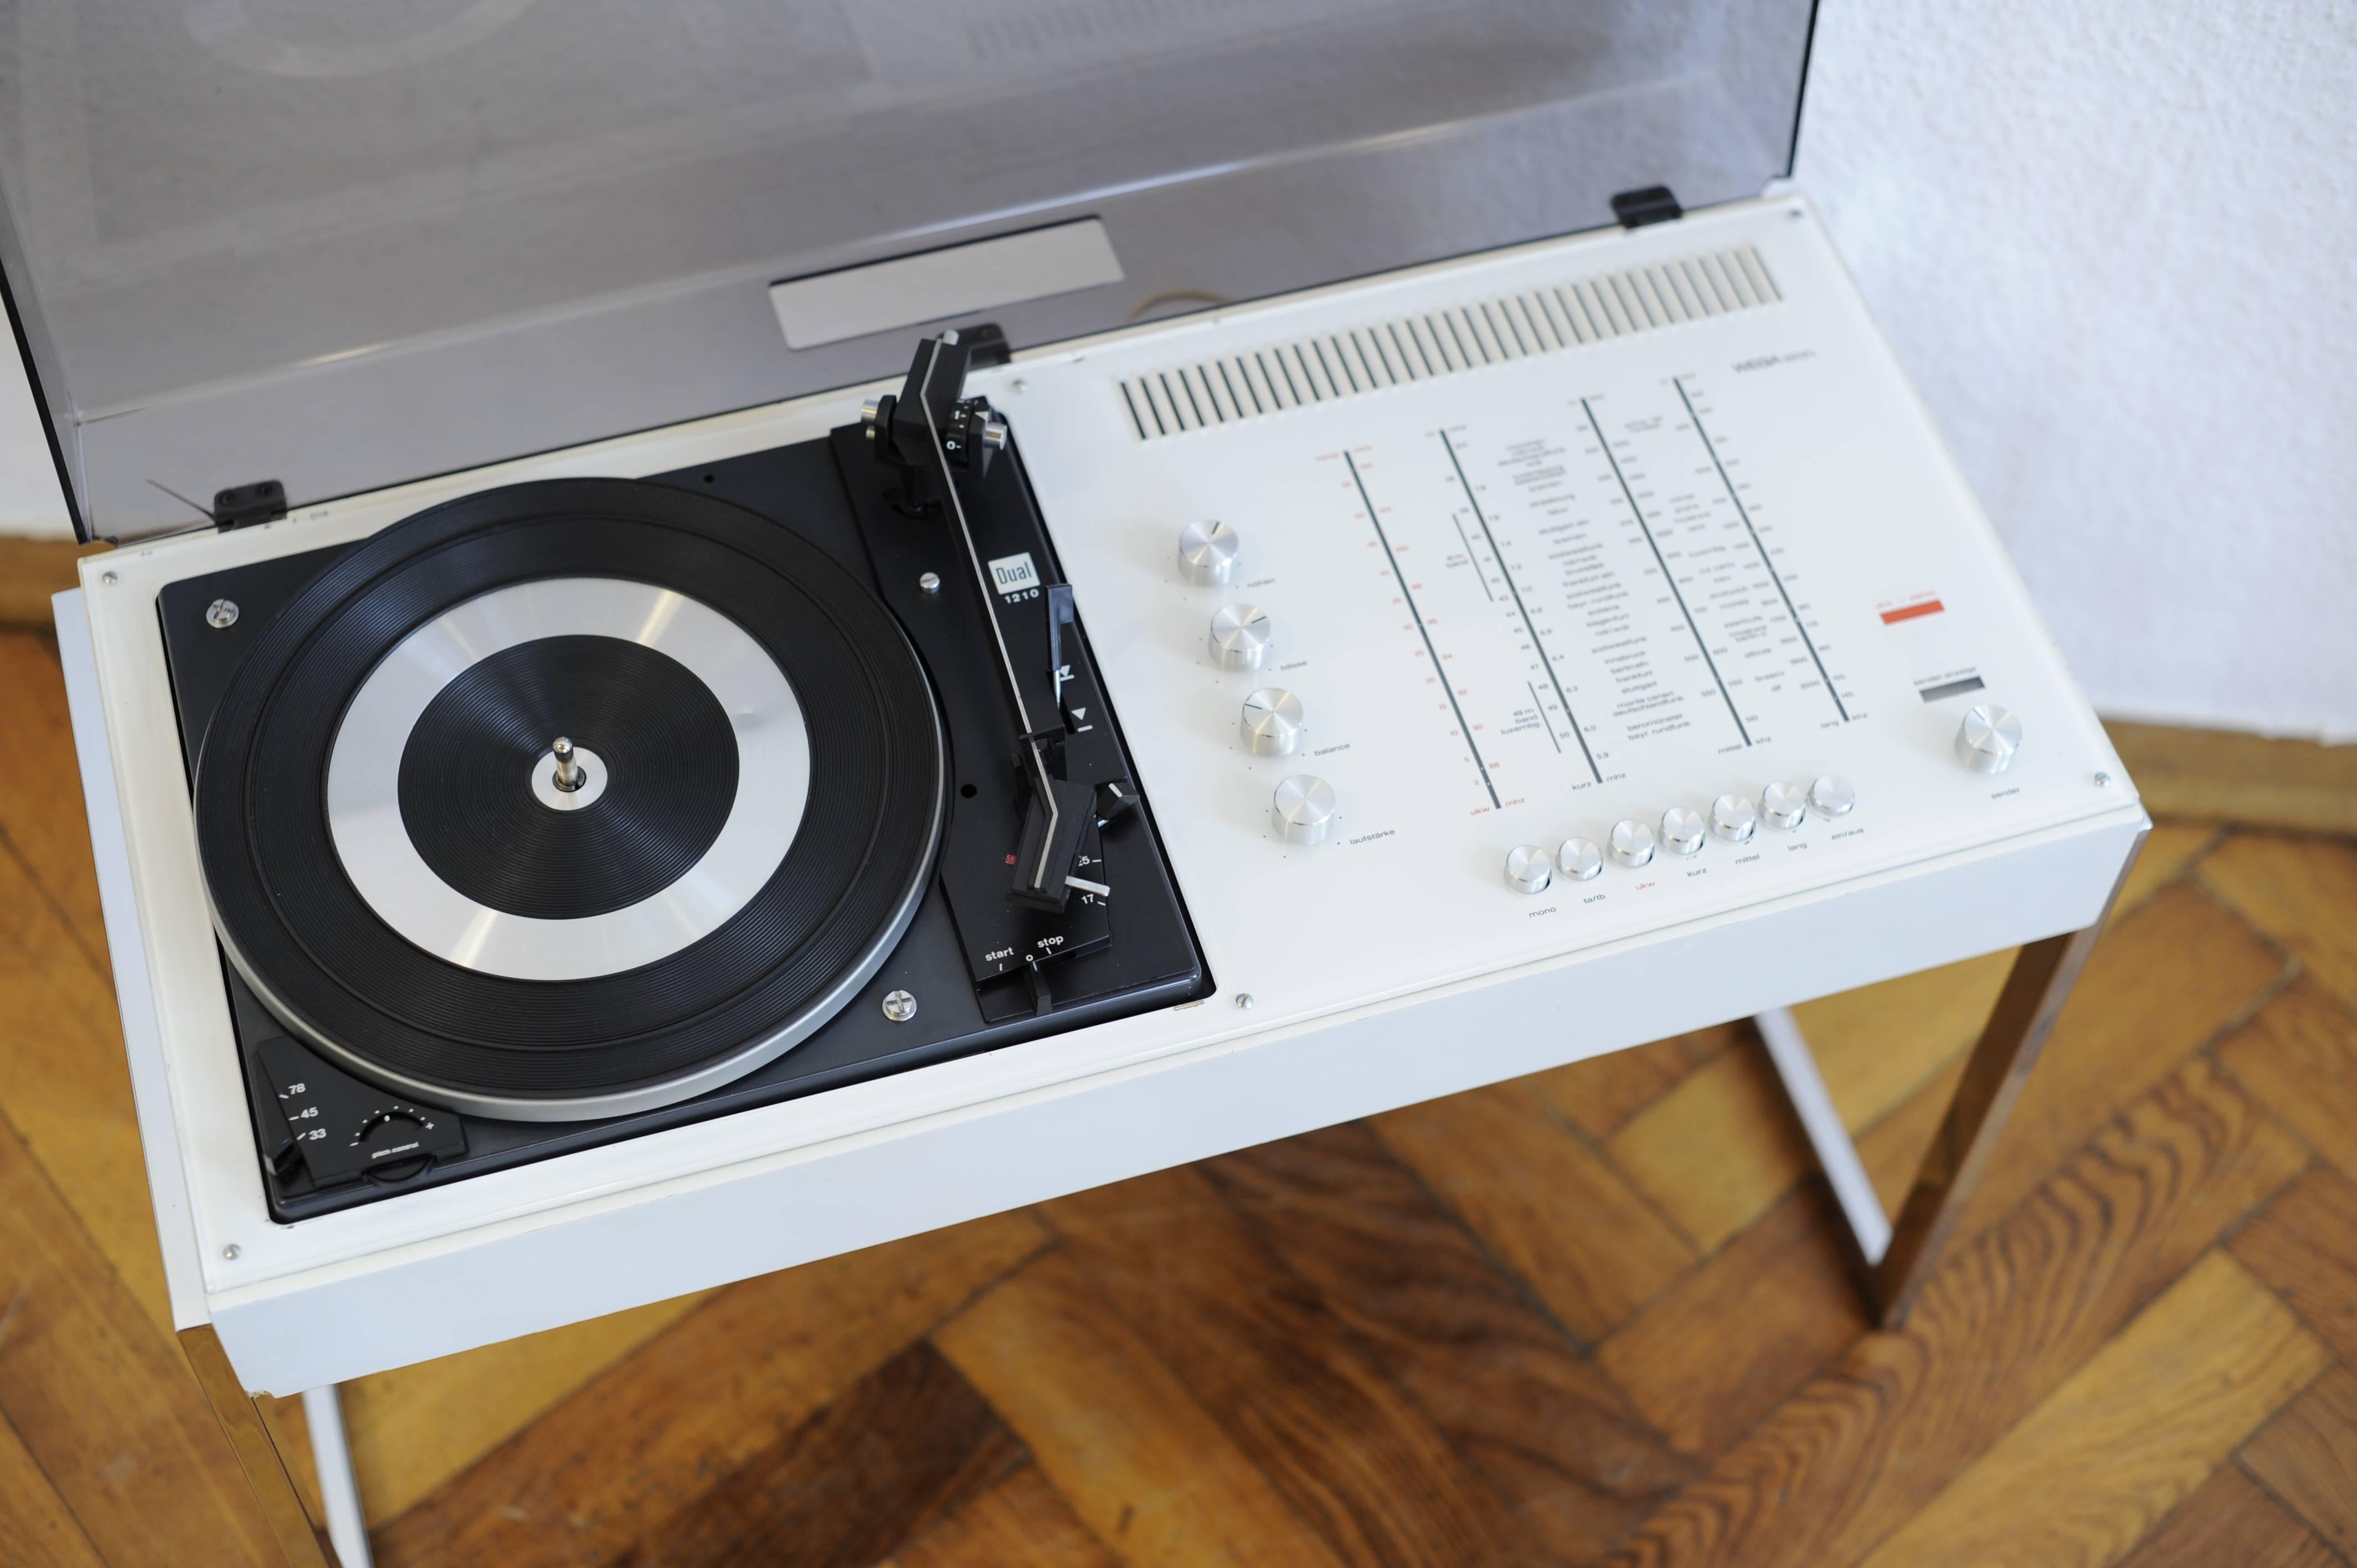 We offer this extremely stylish and cool looking White Wega Studio 3202 L Hifi Record Player Radio Receiver Stereo Equipment on this very cool chrome base stand.
This is definitely the coolest stereo equipment set from the 1970s Panton Eames era we